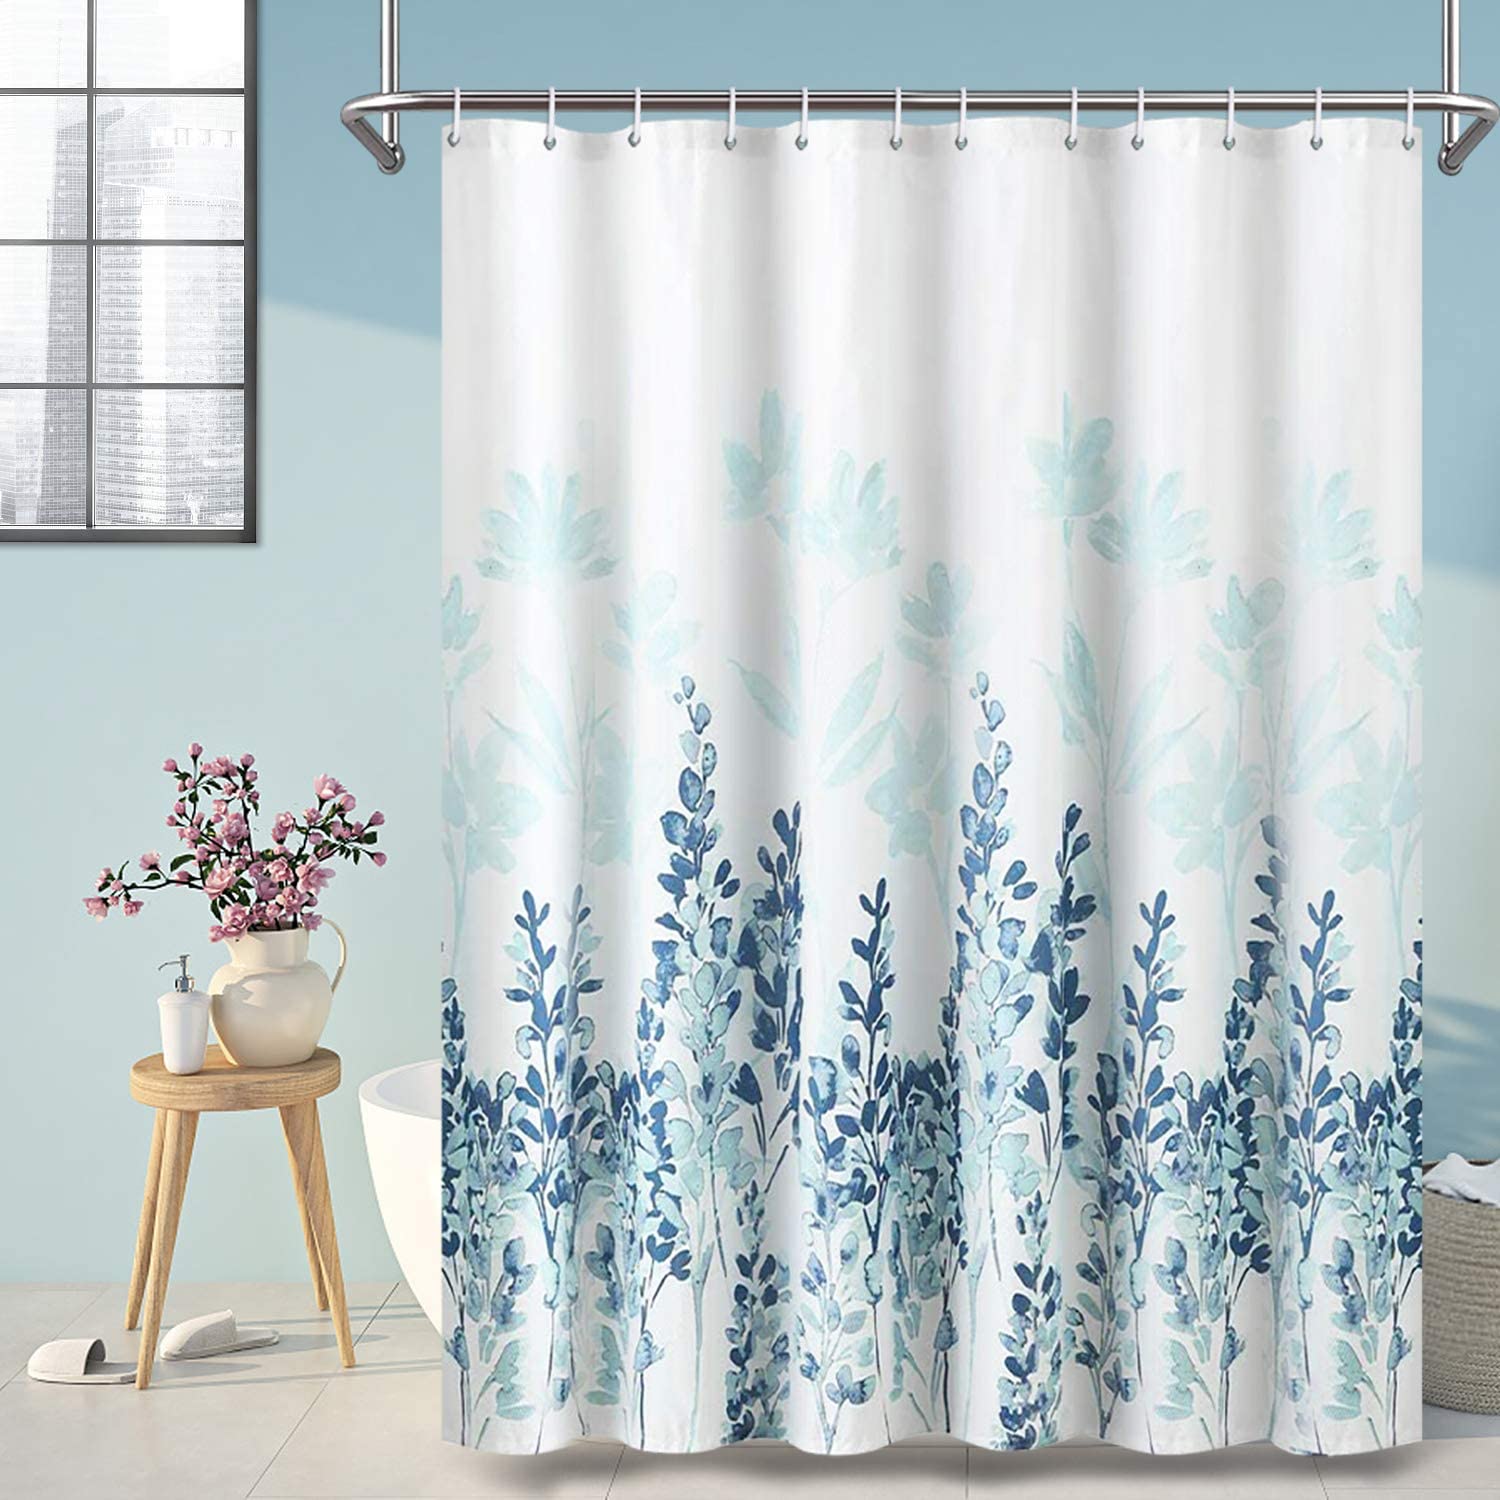 Details about   ARICHOMY Shower Curtain Set Bathroom Fabric Fall Curtains Waterproof Colorful Fu 